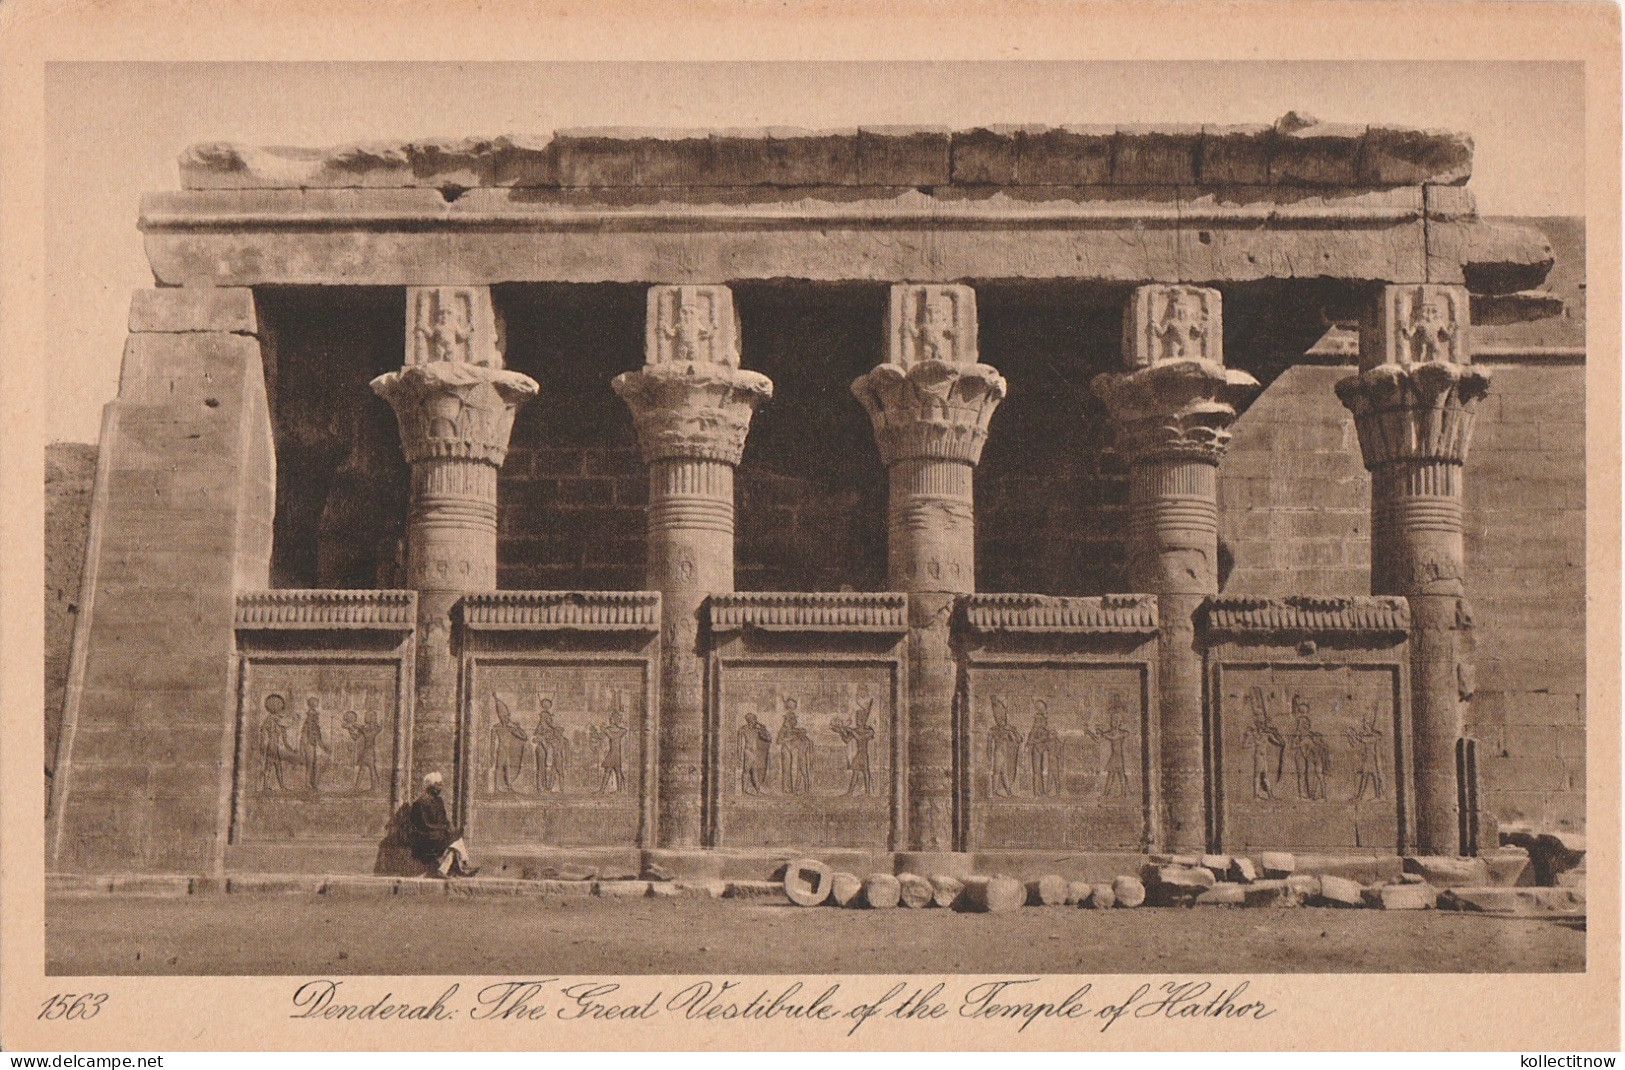 THE GREAT VESTIBLE OF THE TEMPLE OF HATHOR - Damanhur